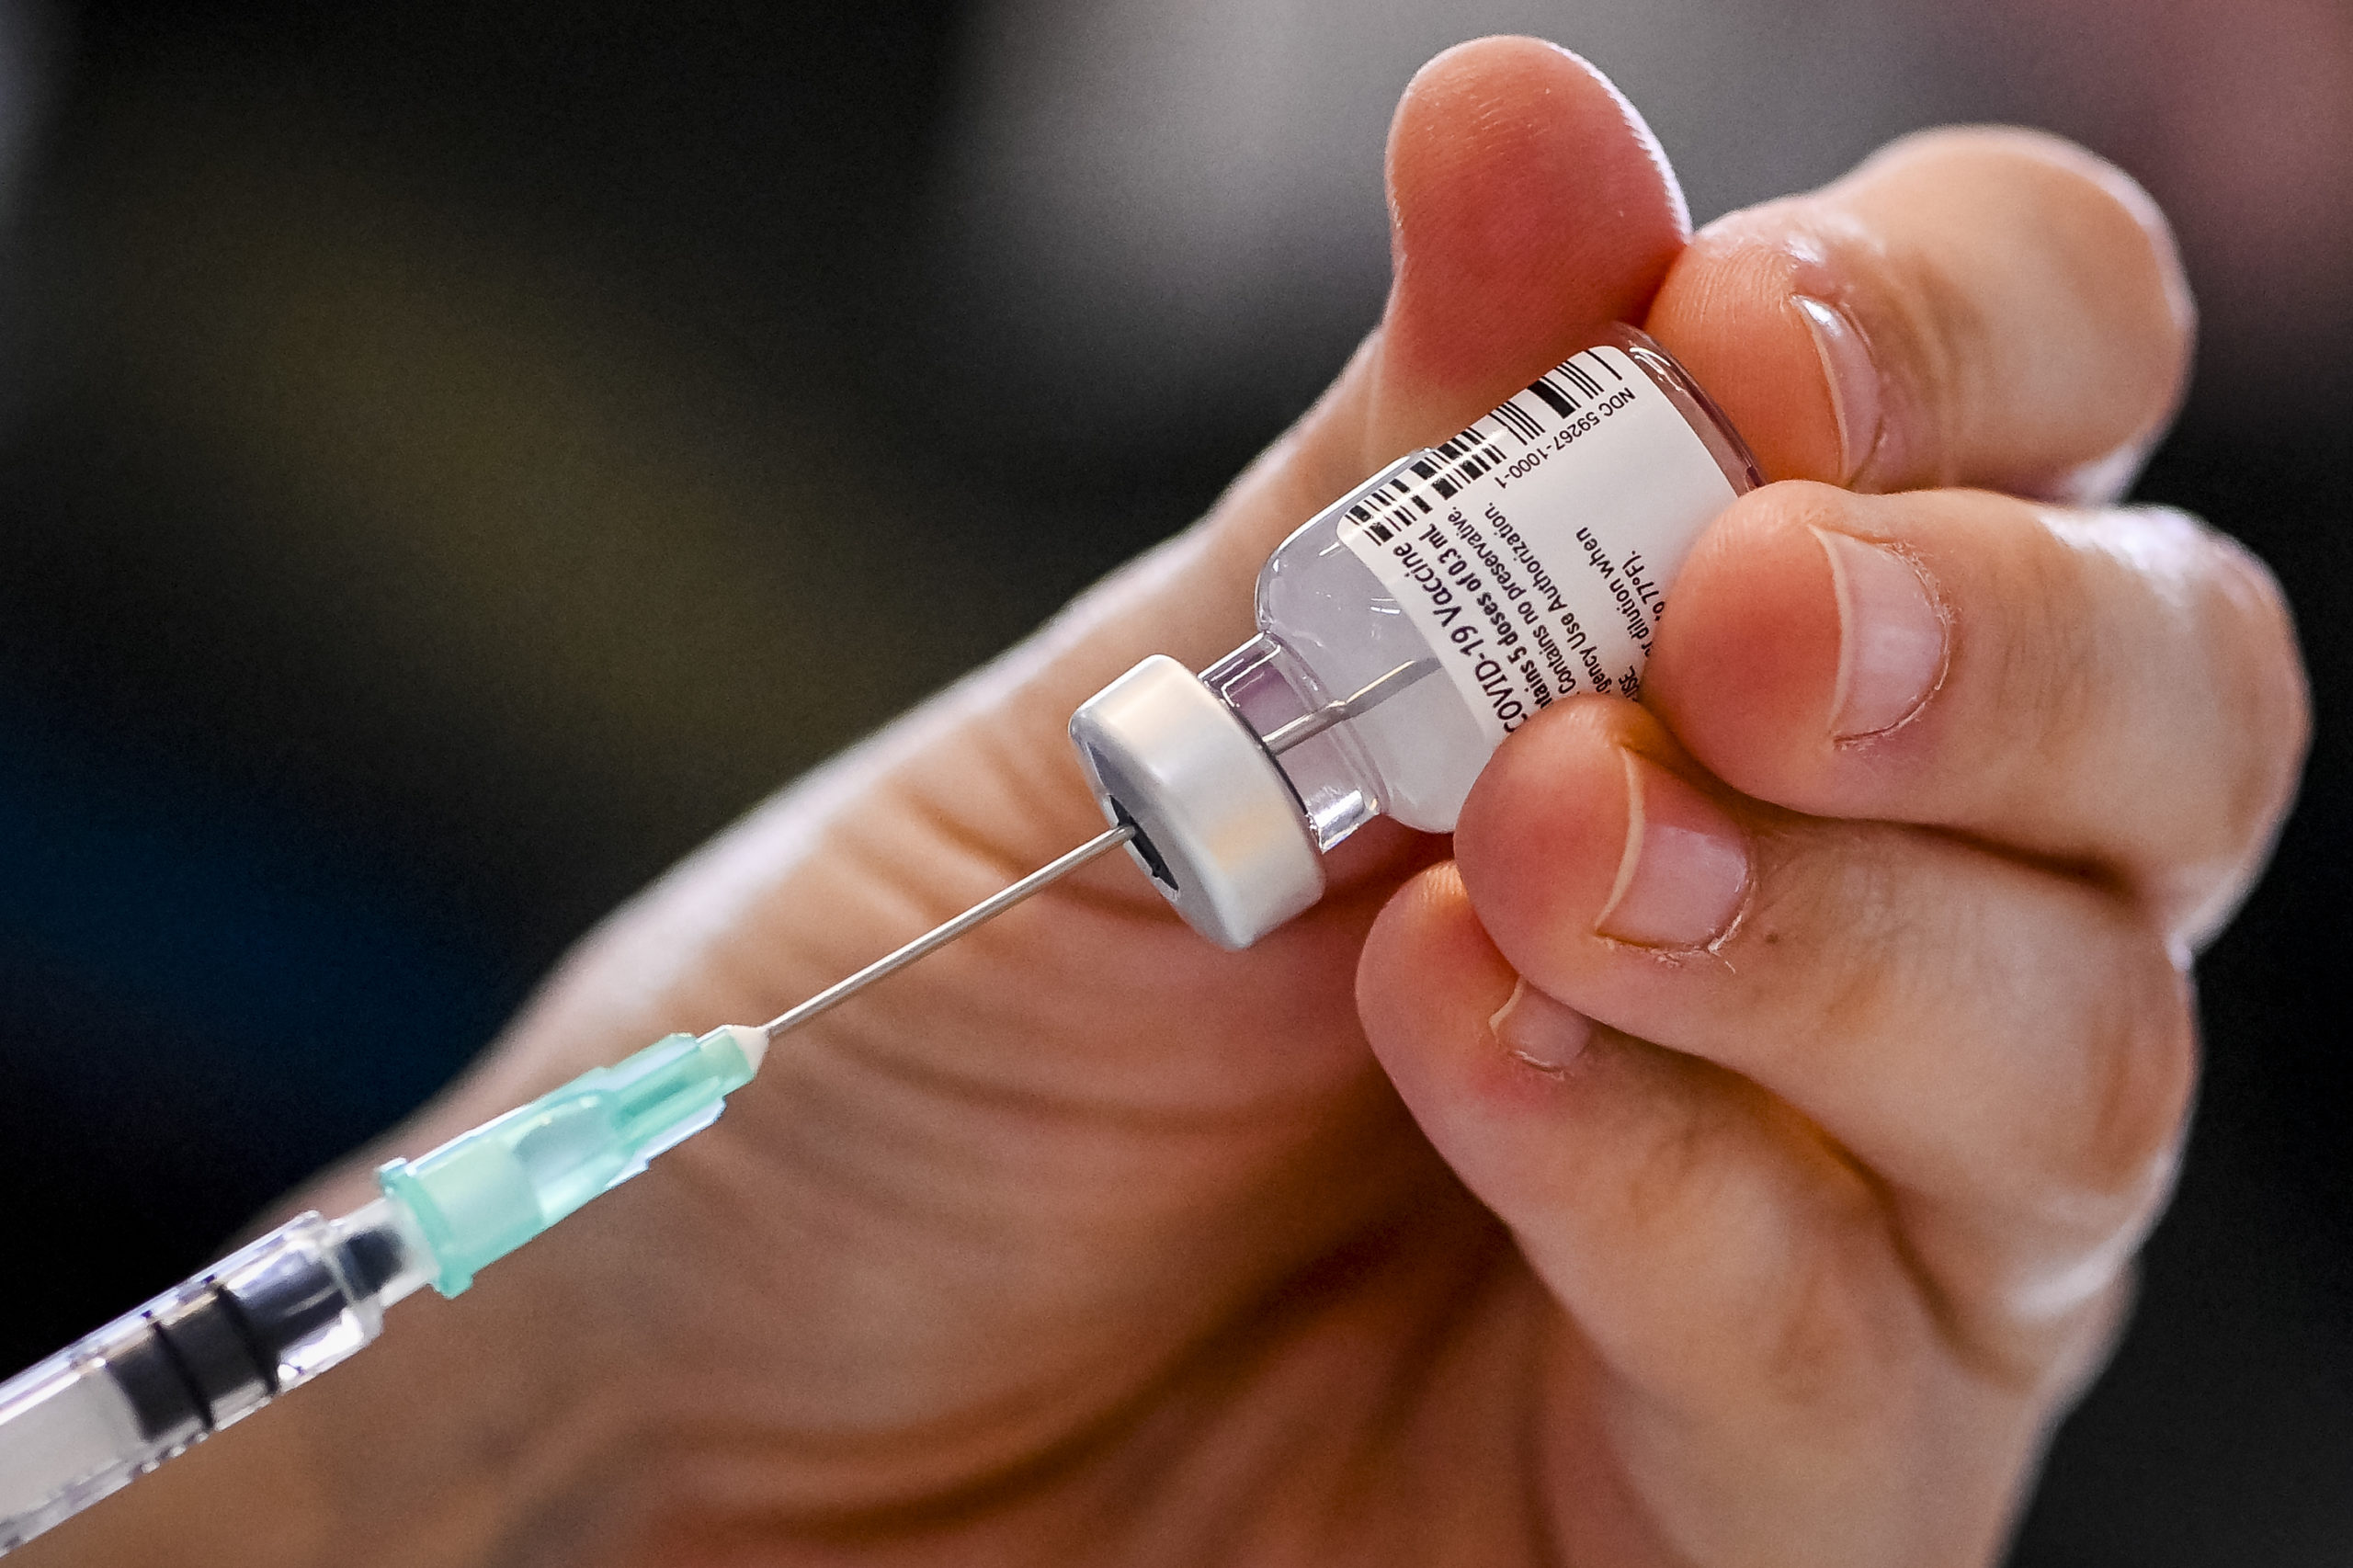 A nurse prepares a dose of the Pfizer-BioNTech Covid-19 vaccine, during a vaccination operation at the "Woonzorgcentrum Sint-Pieters" rest home on December 28, 2020 in Puurs, in Belgium's Flemish region, as the country starts its national vaccination campaign to fight against the spread of the novel coronavirus. (Photo by DIRK WAEM/POOL/AFP via Getty Images)